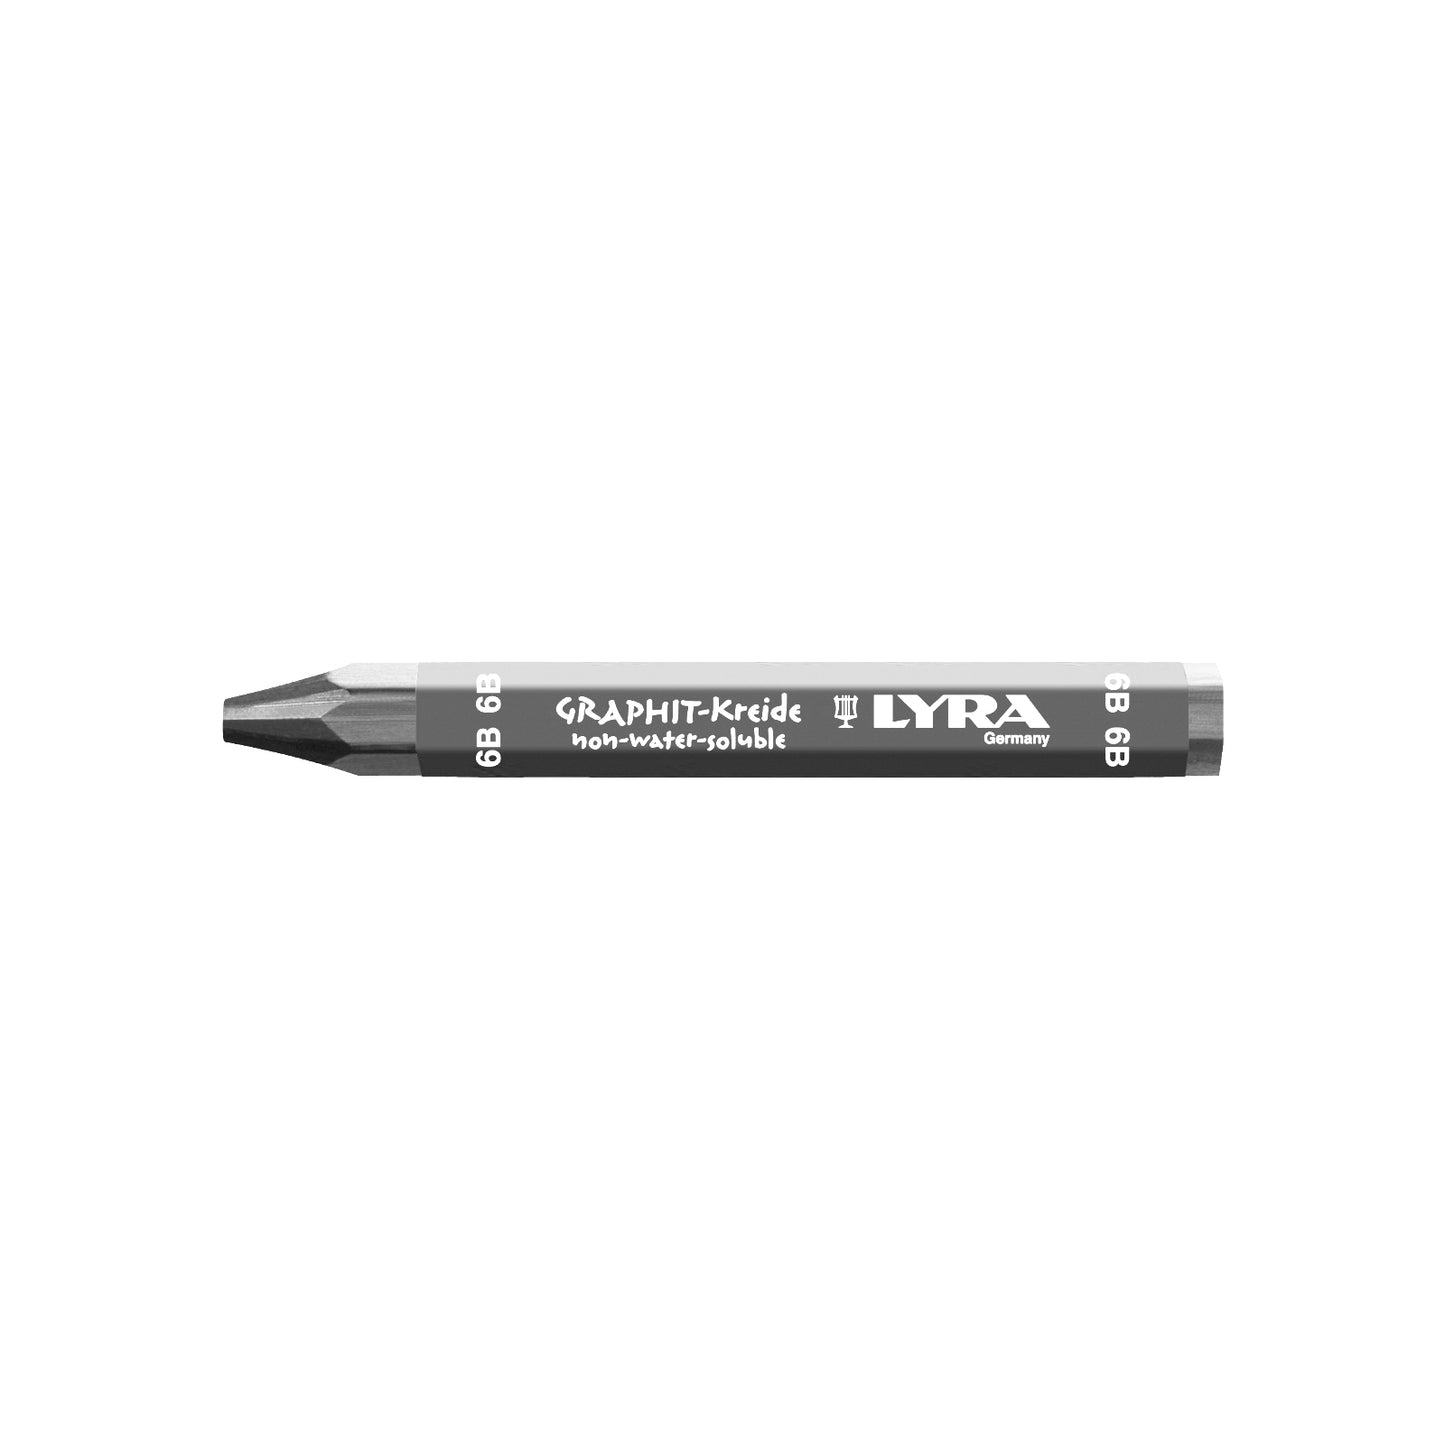  LYRA Graphite Crayons, Assorted Degrees, Water-Soluble, Set of  24 Crayons, Black (5633240) : Art Supplies : Arts, Crafts & Sewing